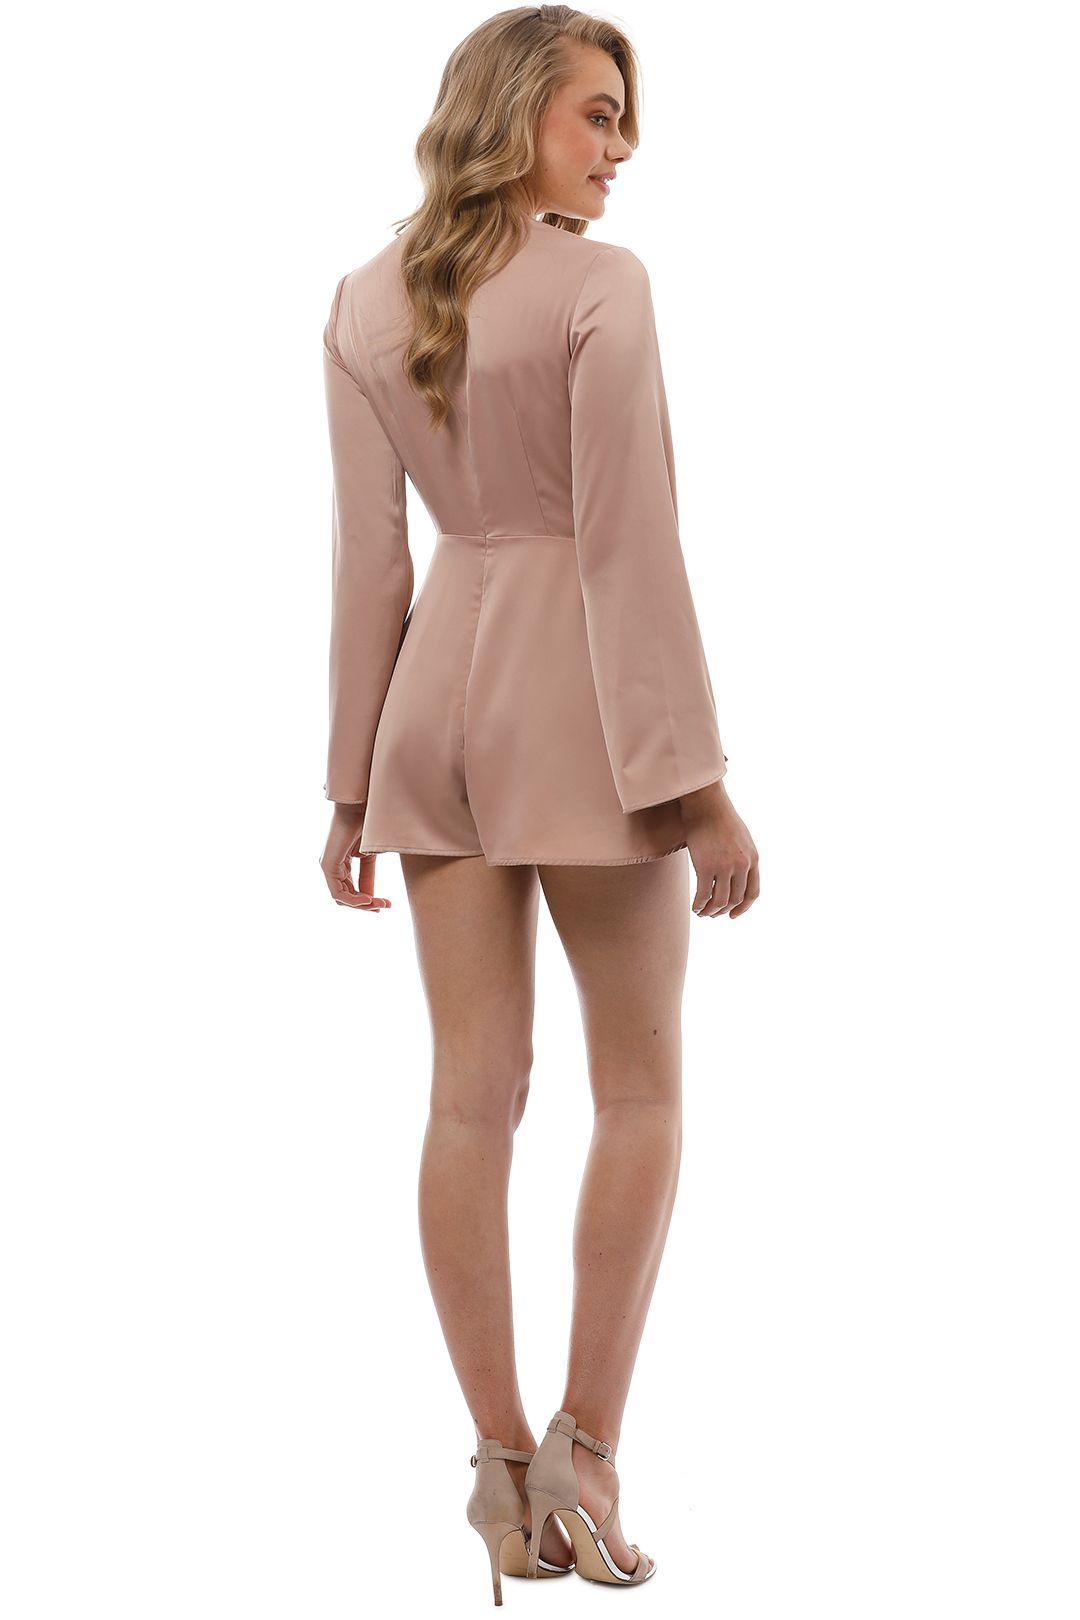 CMEO Collective - Influential Playsuit - Sand - Back